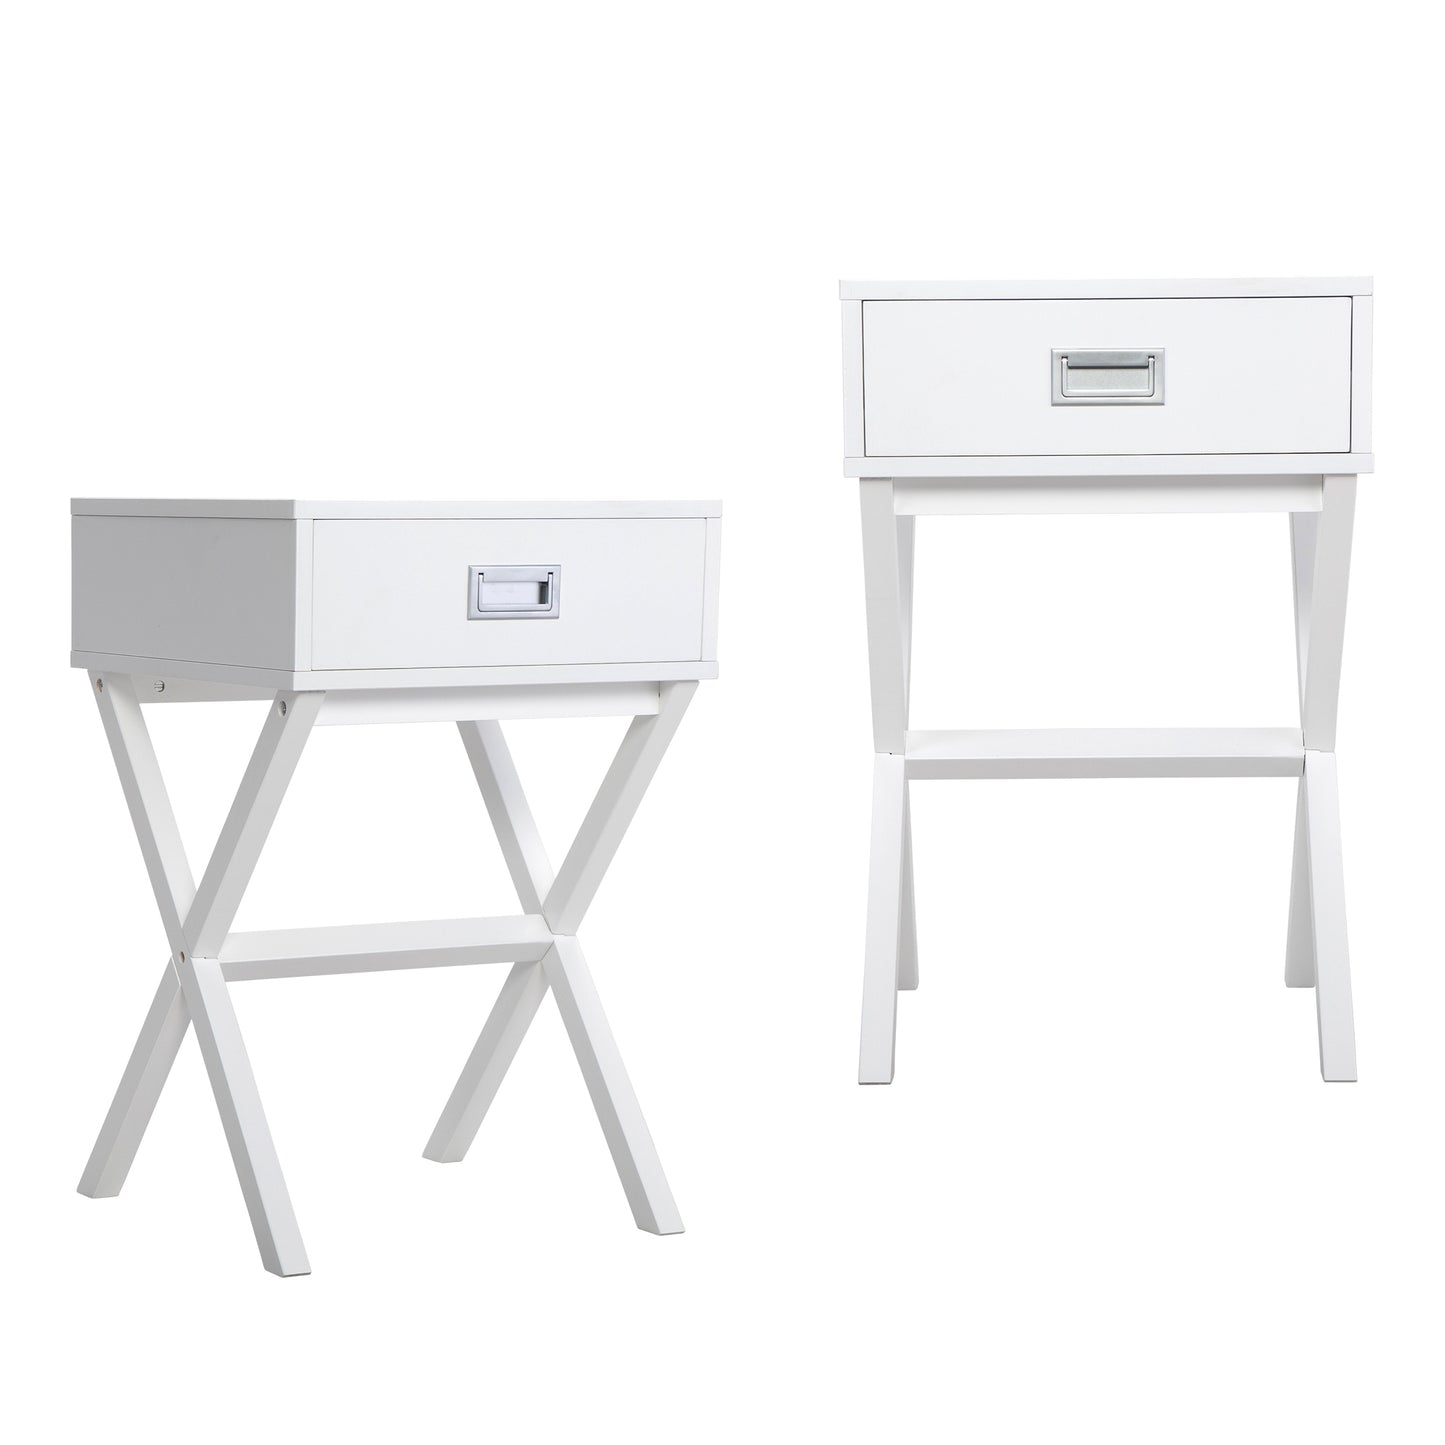 Set of 2 White Wooden Nightstands, End Table with Drawer